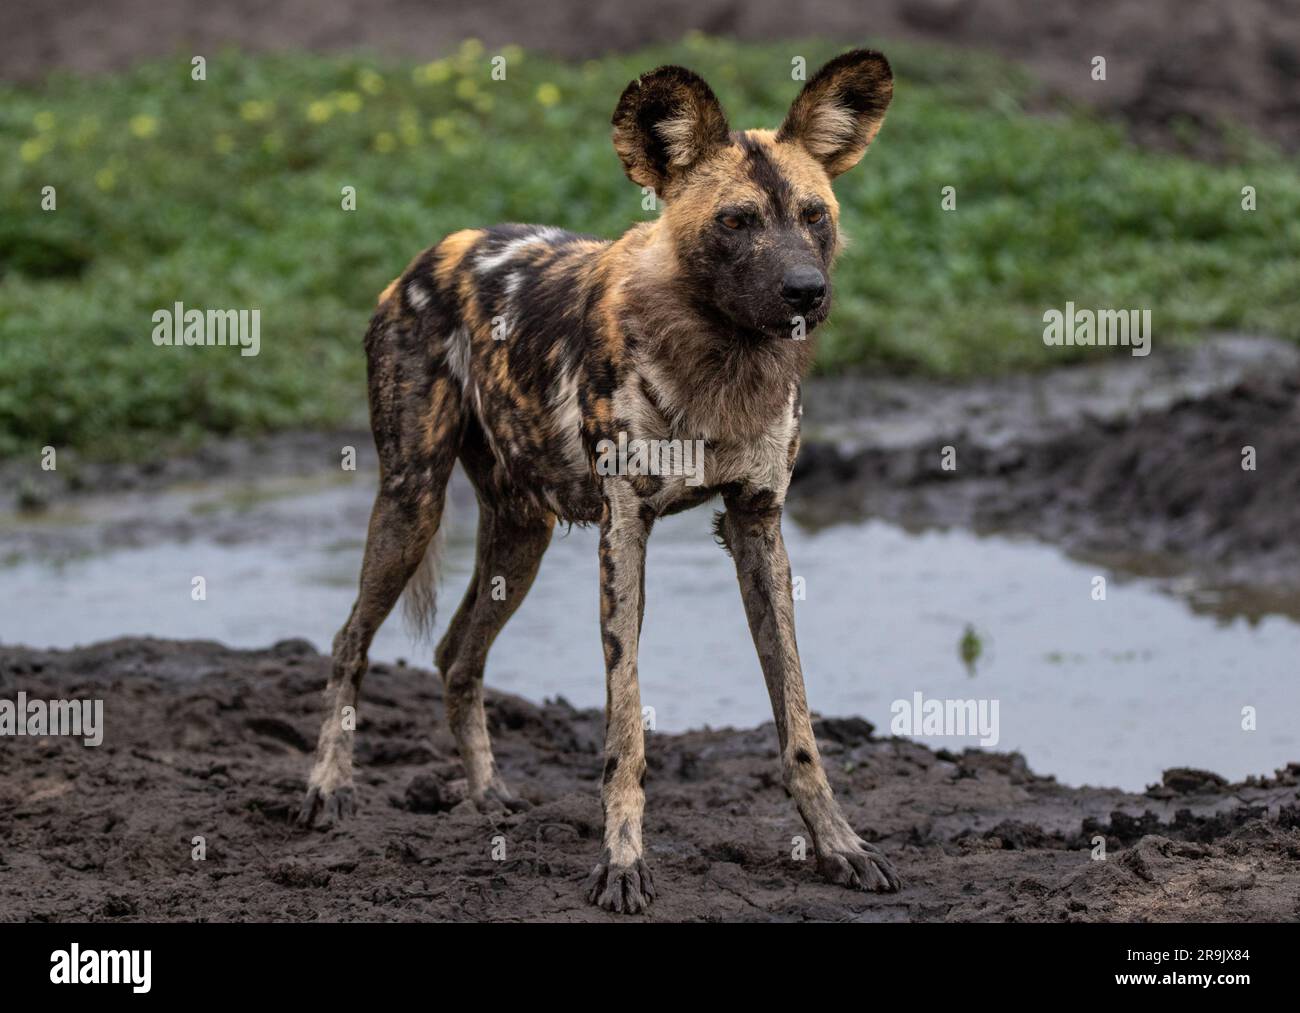 A full body portrait of a wild dog, Lycaon pictus, standing next to water. Stock Photo